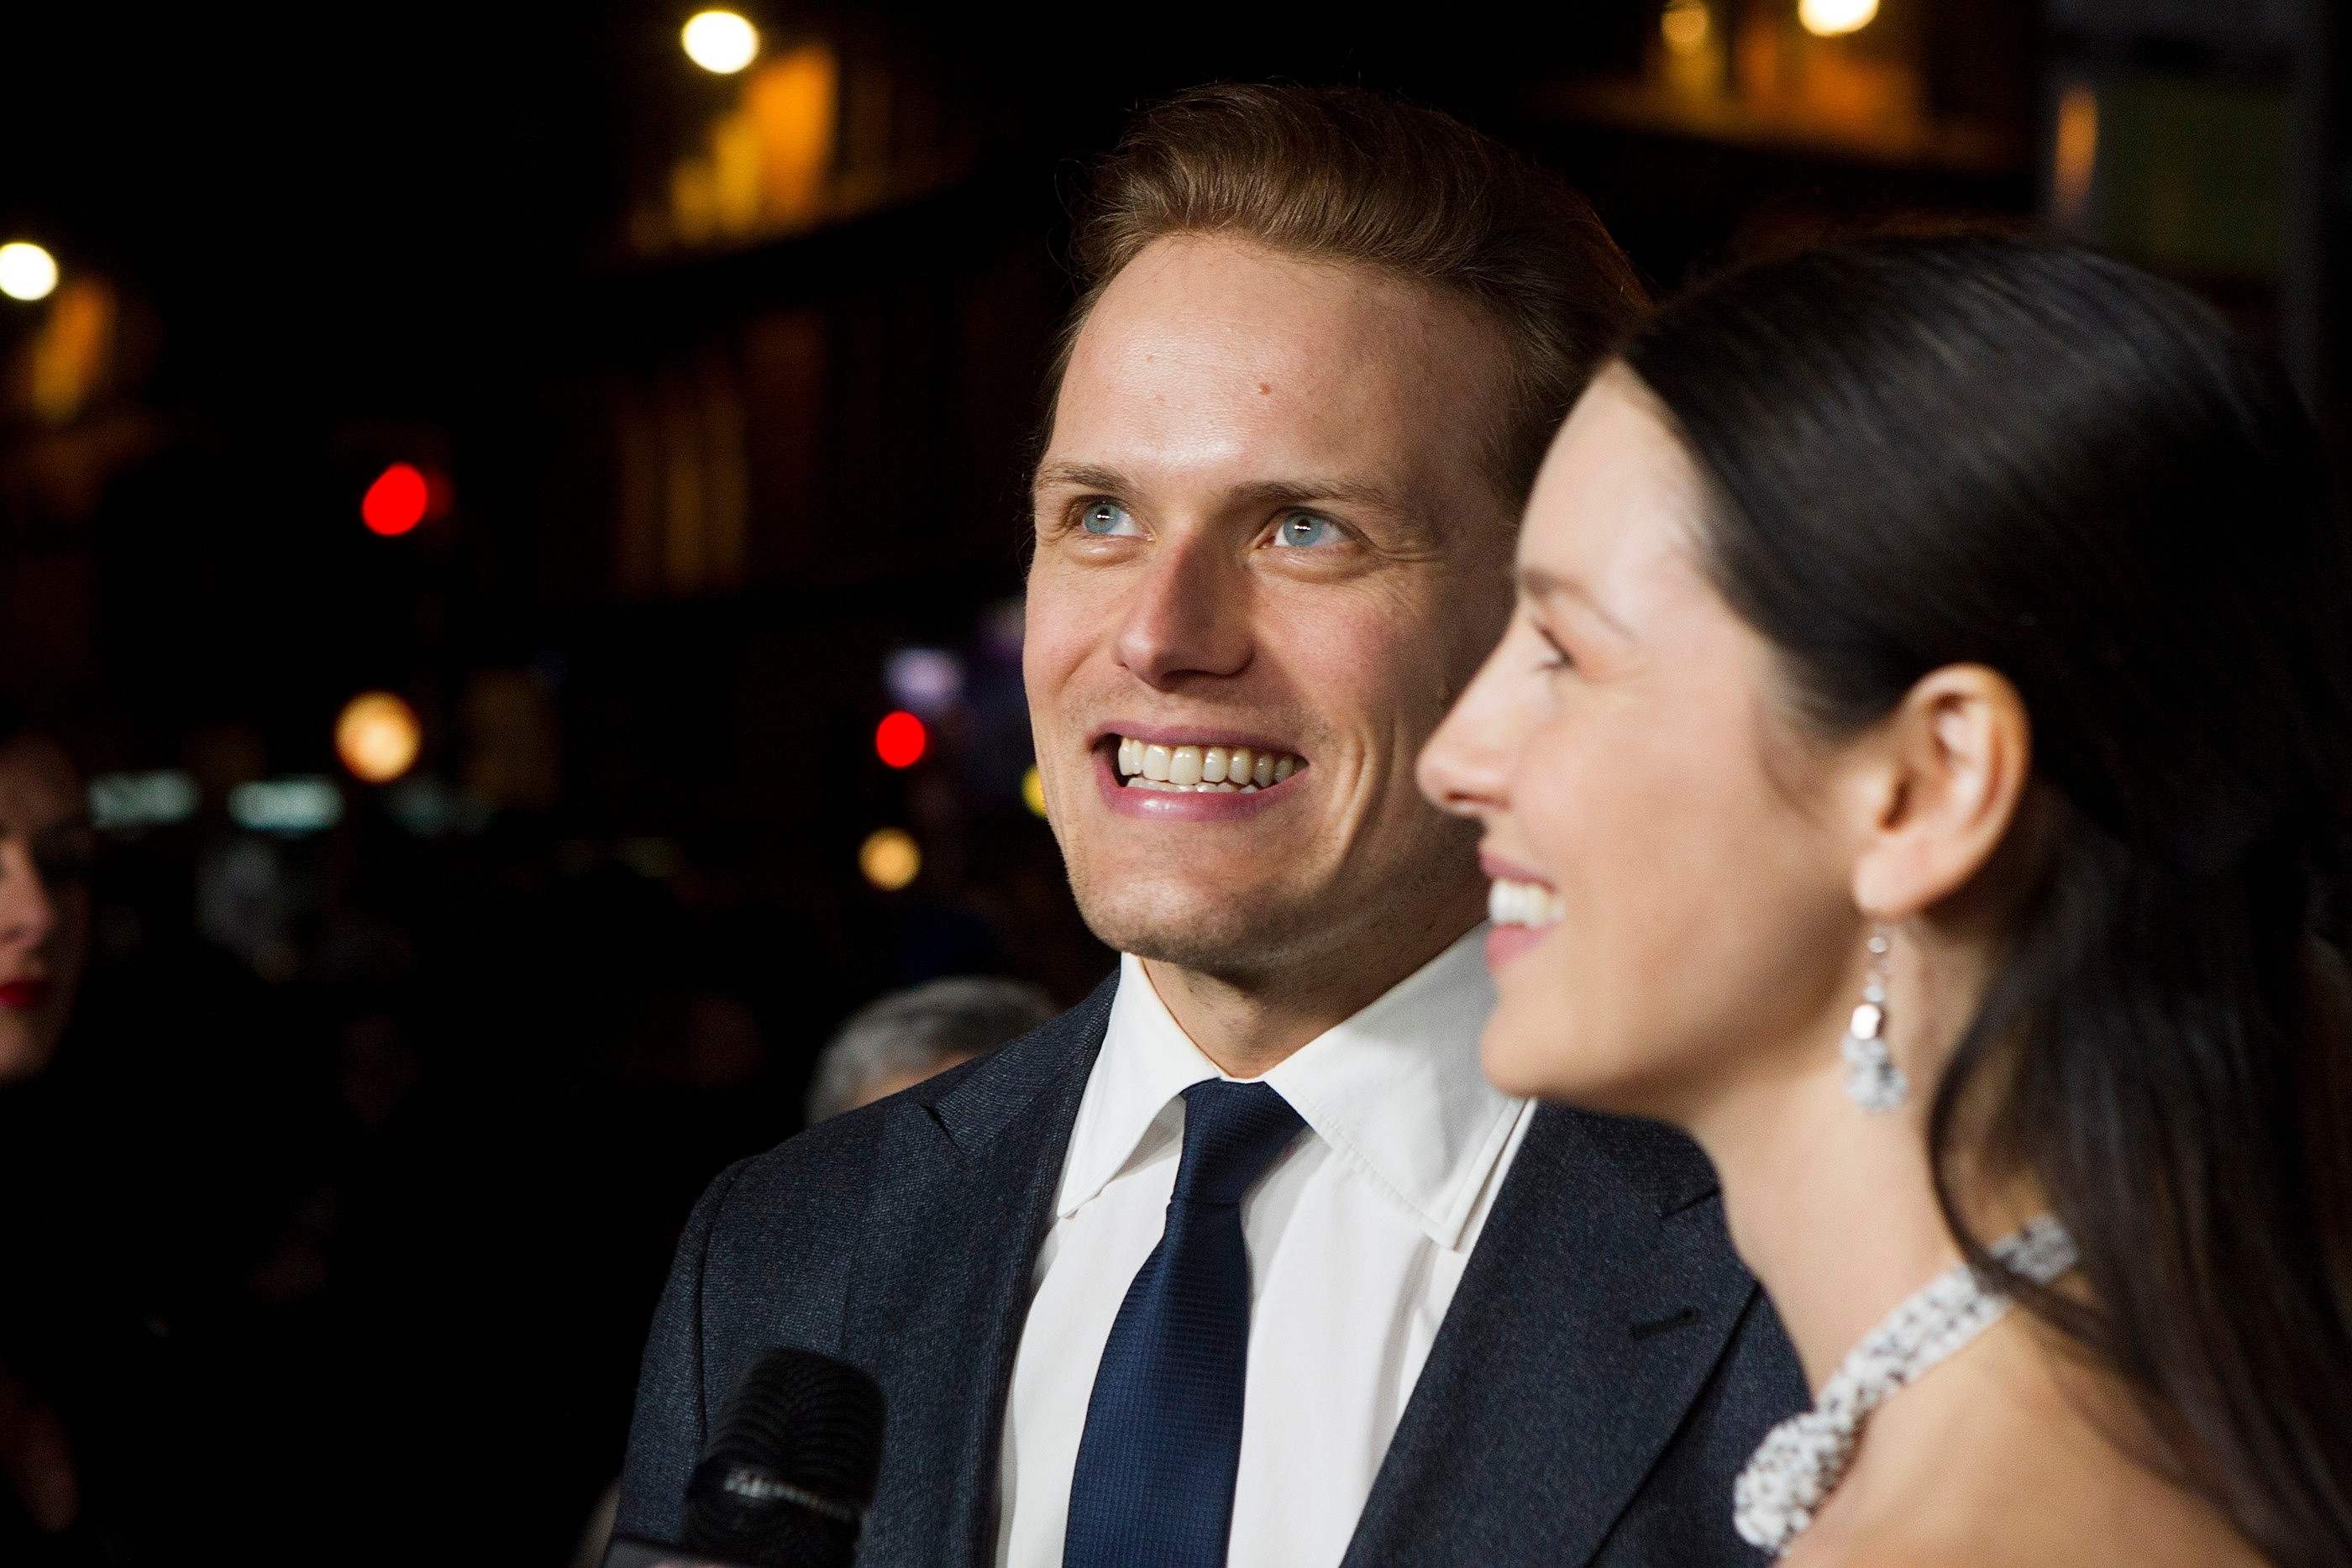 Stars of Outlander Sam Heughan and Caitriona Balfe on the red carpet at the BAFTA Scotland Awards held at the Radisson Blu, Glasgow. The awards honour the very best Scottish talent in film, television and video games industries. Nov 6 2016